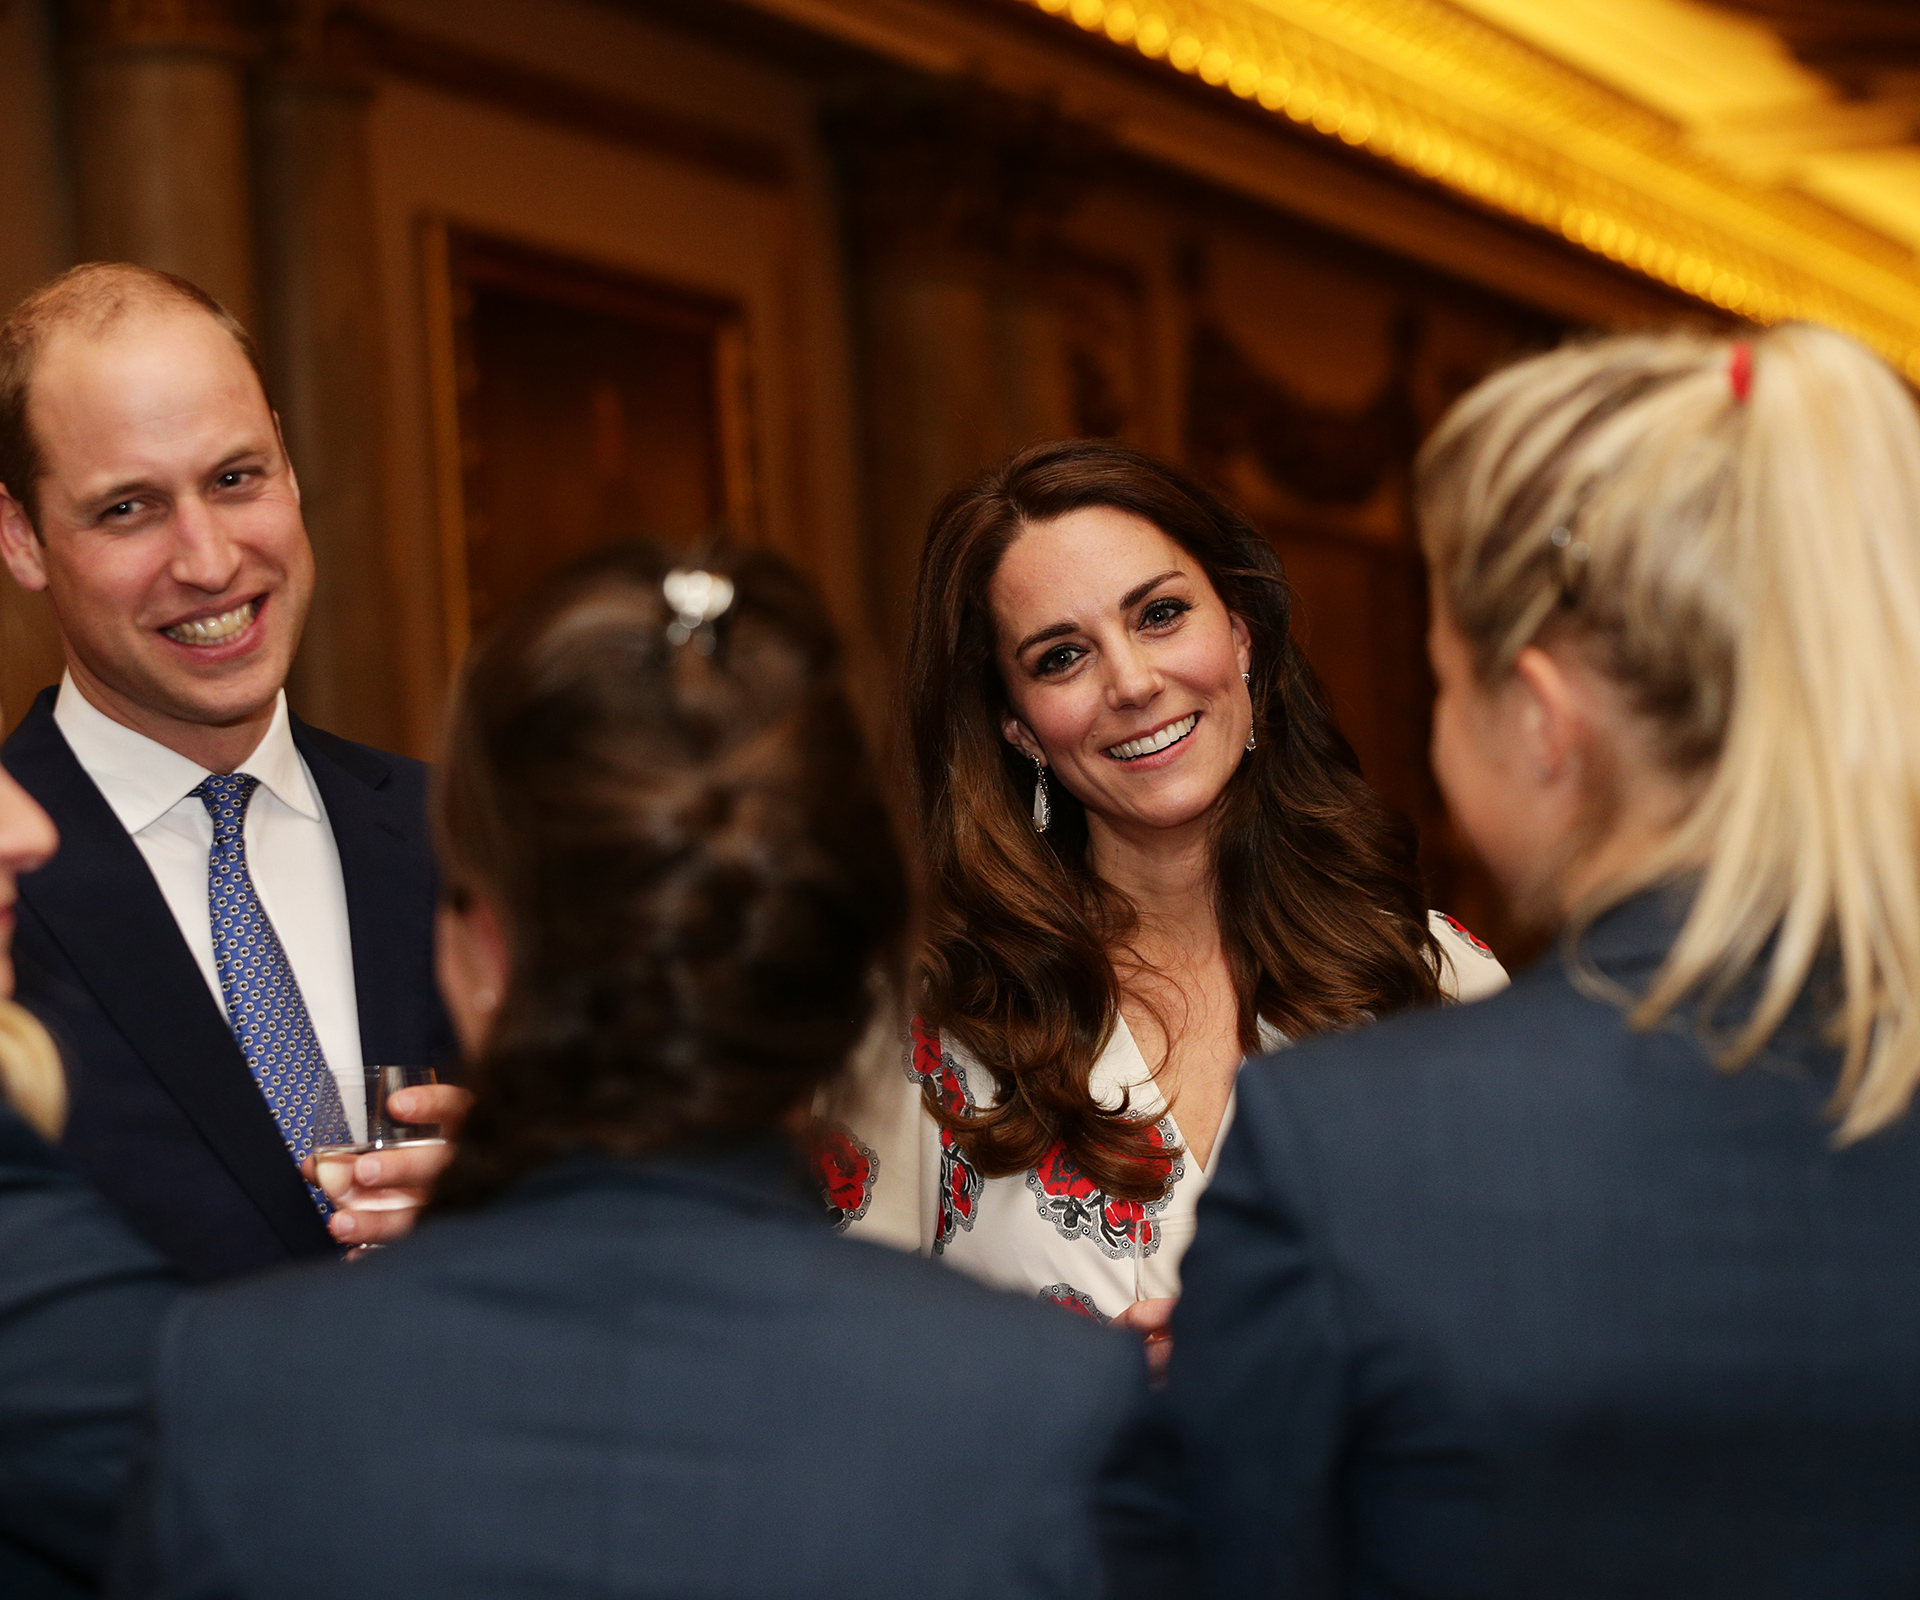 Kate, Wills and Harry join the Queen to celebrate Team GB